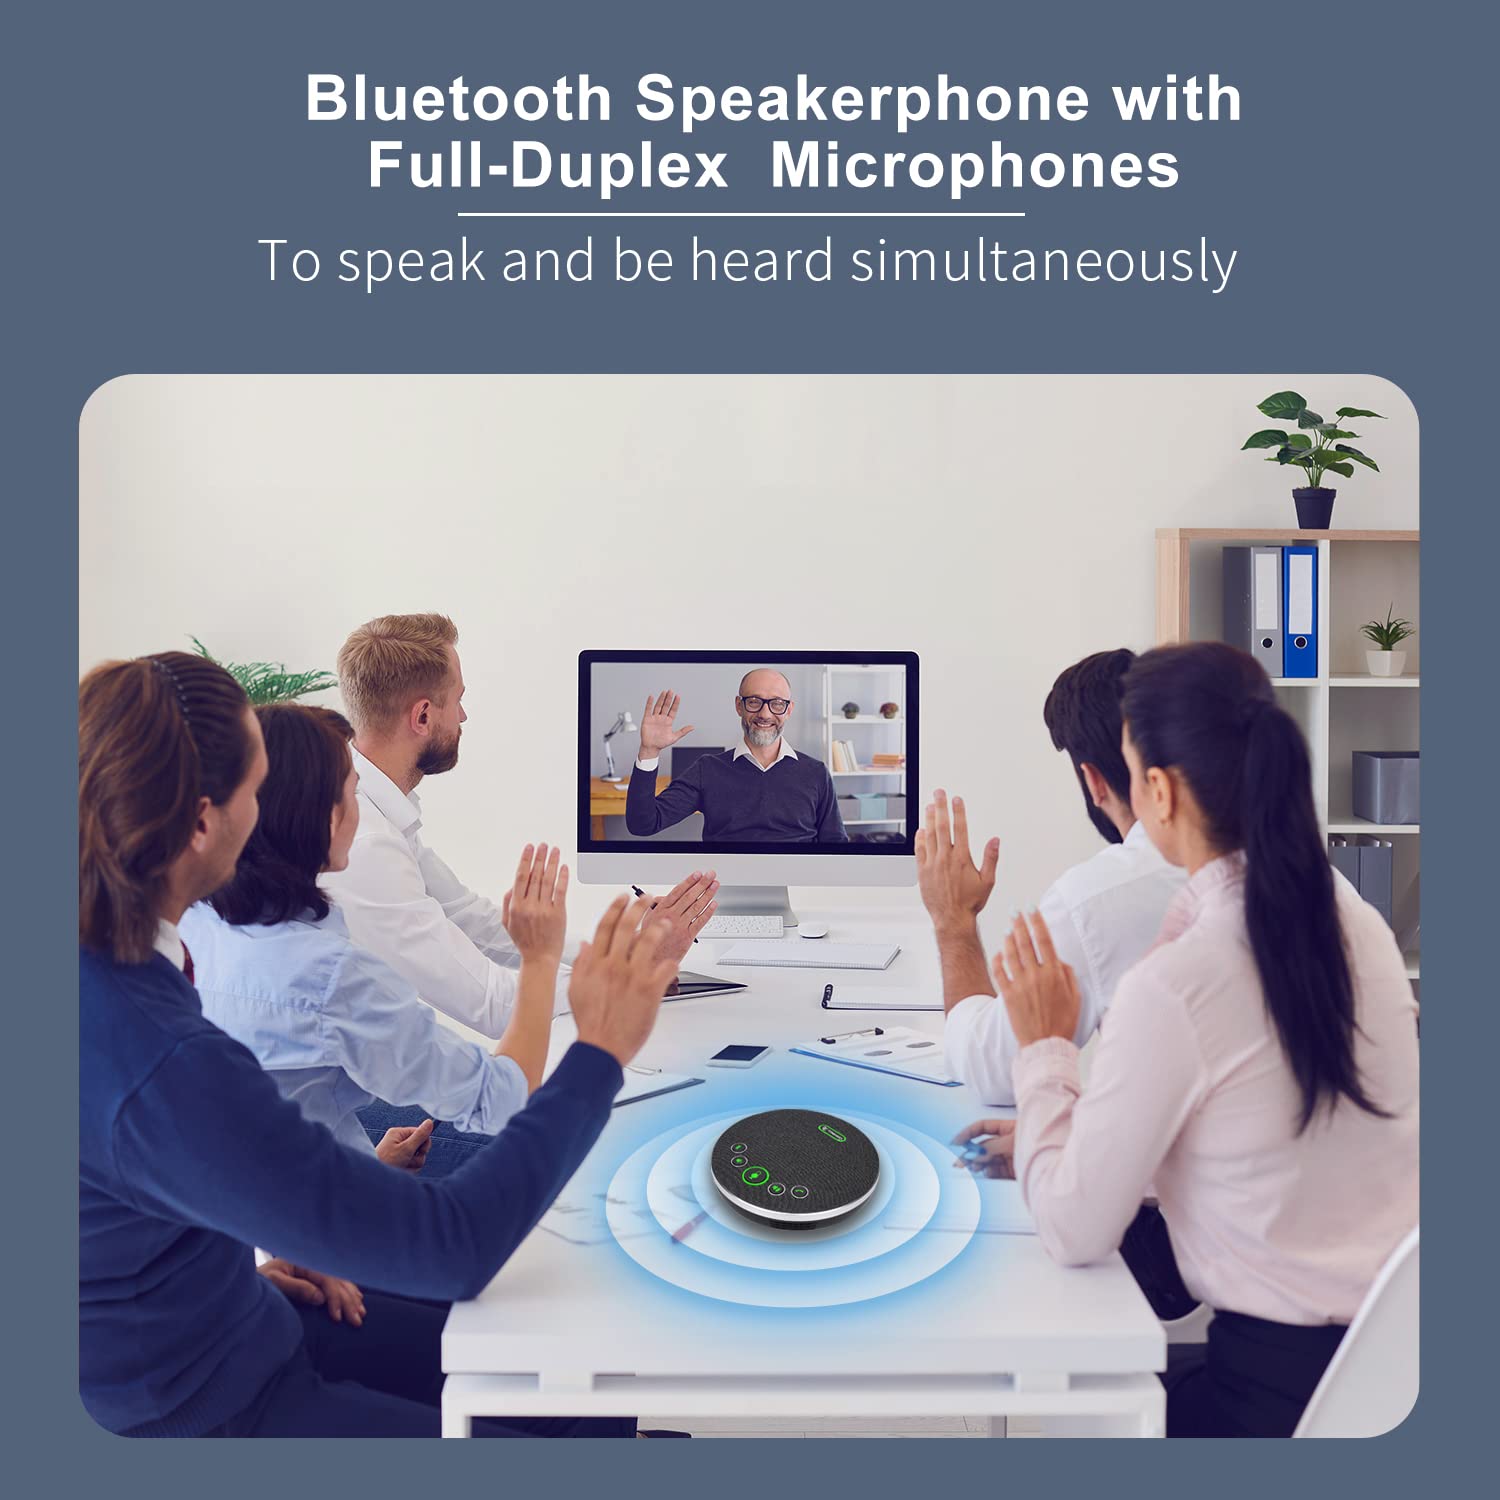 TONGVEO Wireless Speakerphone Conference Speaker,Daisy Chain 2.4G USB Speaker with Expandable Microphone with 360° Voice Pickup,Full Duplex Speakerphone Noise Canceling Mics for 20 People Conference